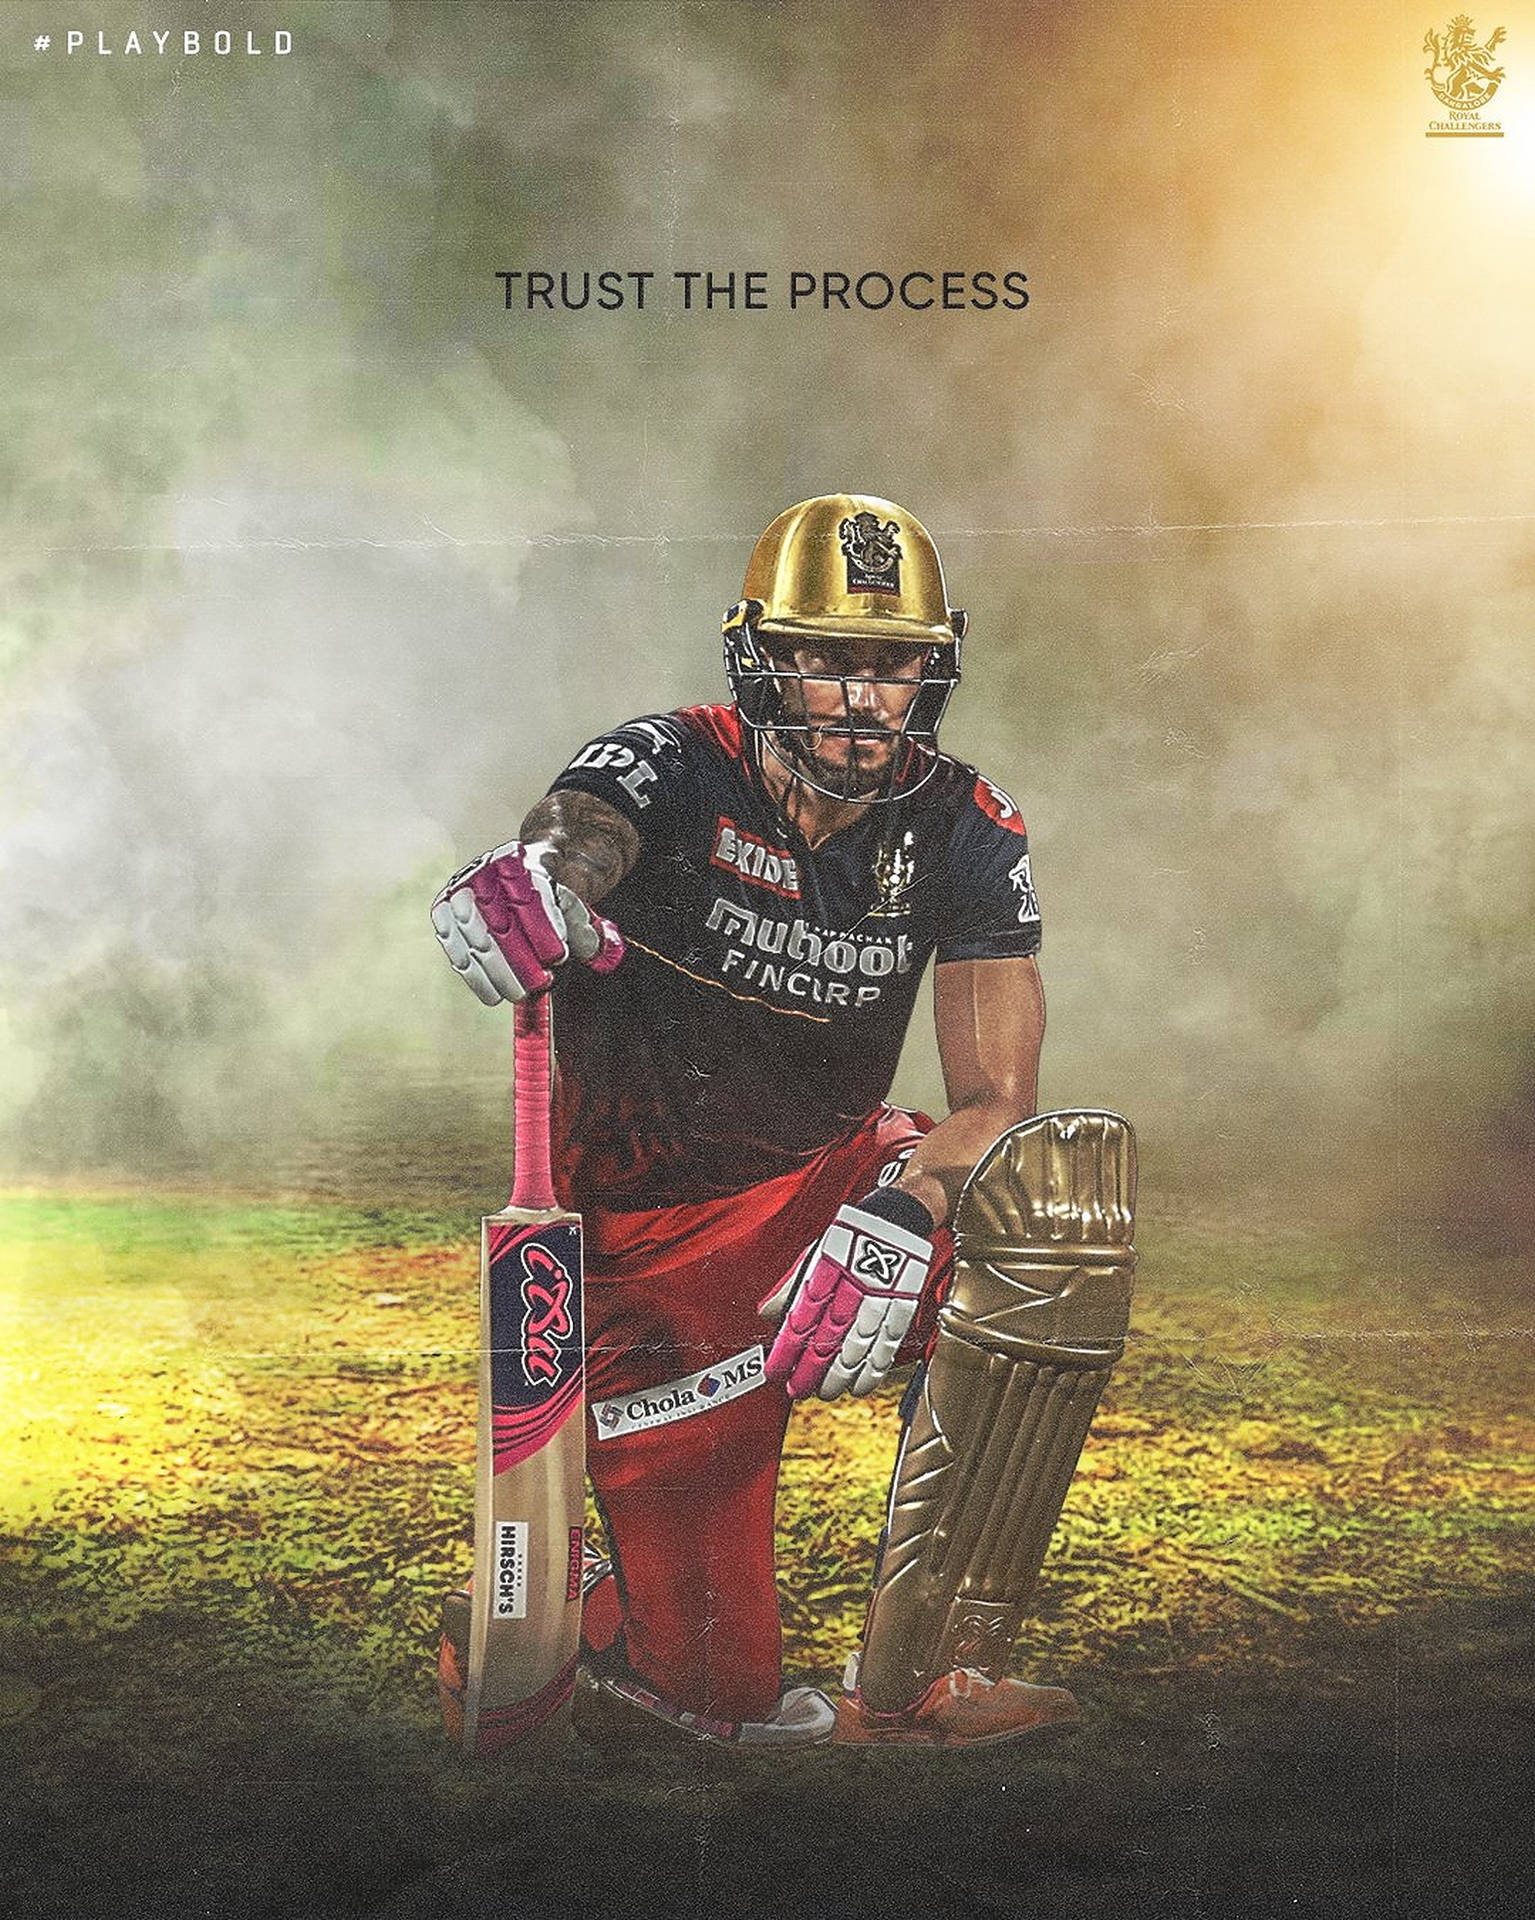 Royal Challengers Bangalore Trust The Process Background